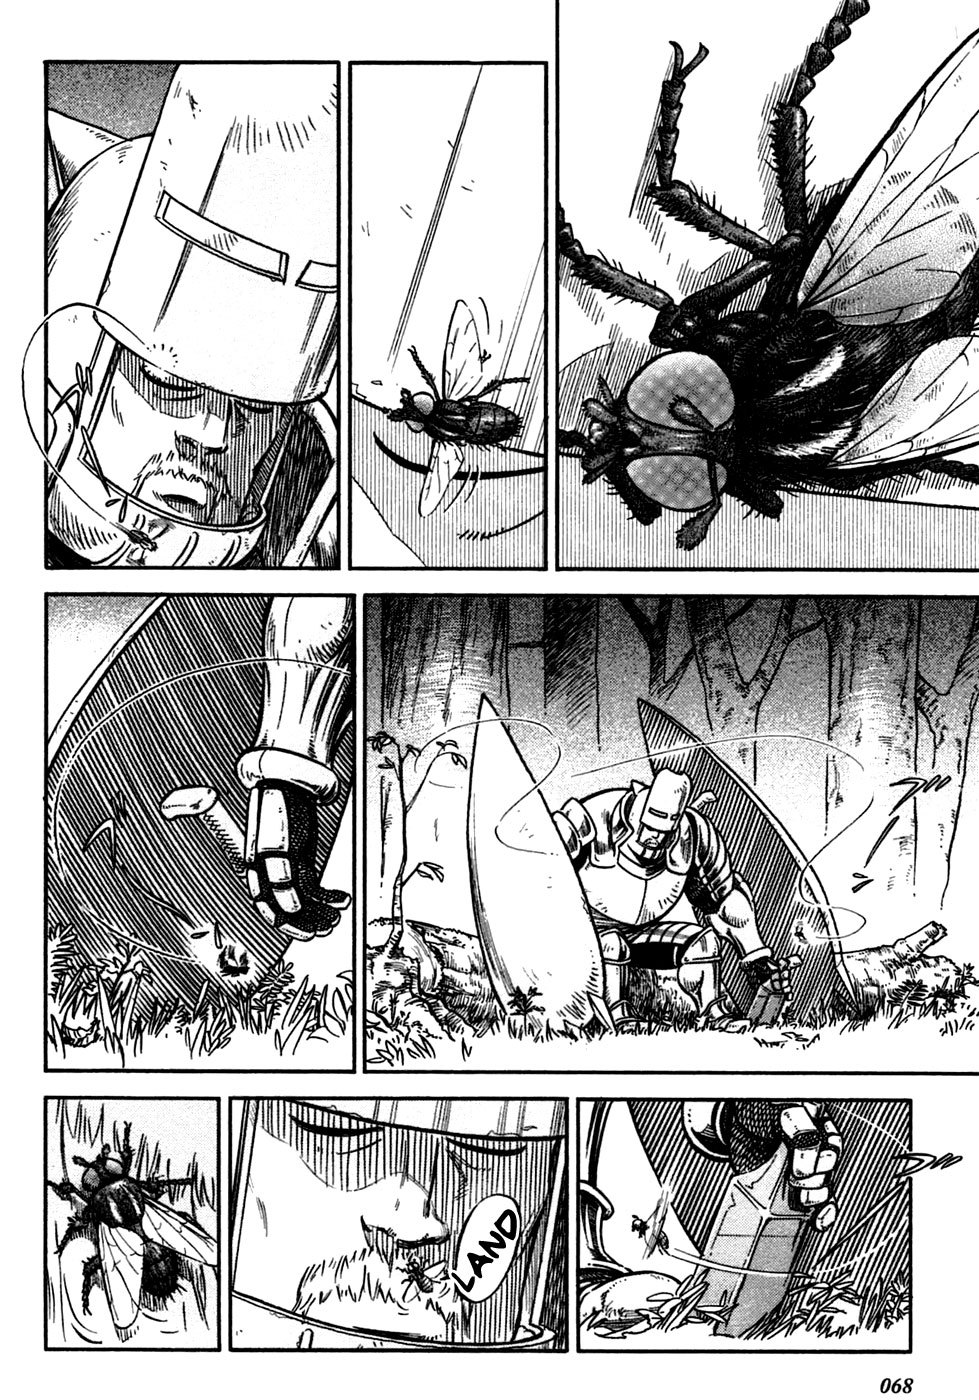 Stravaganza - Isai No Hime Vol.1 Chapter 3: Attack On Umpa - Picture 3